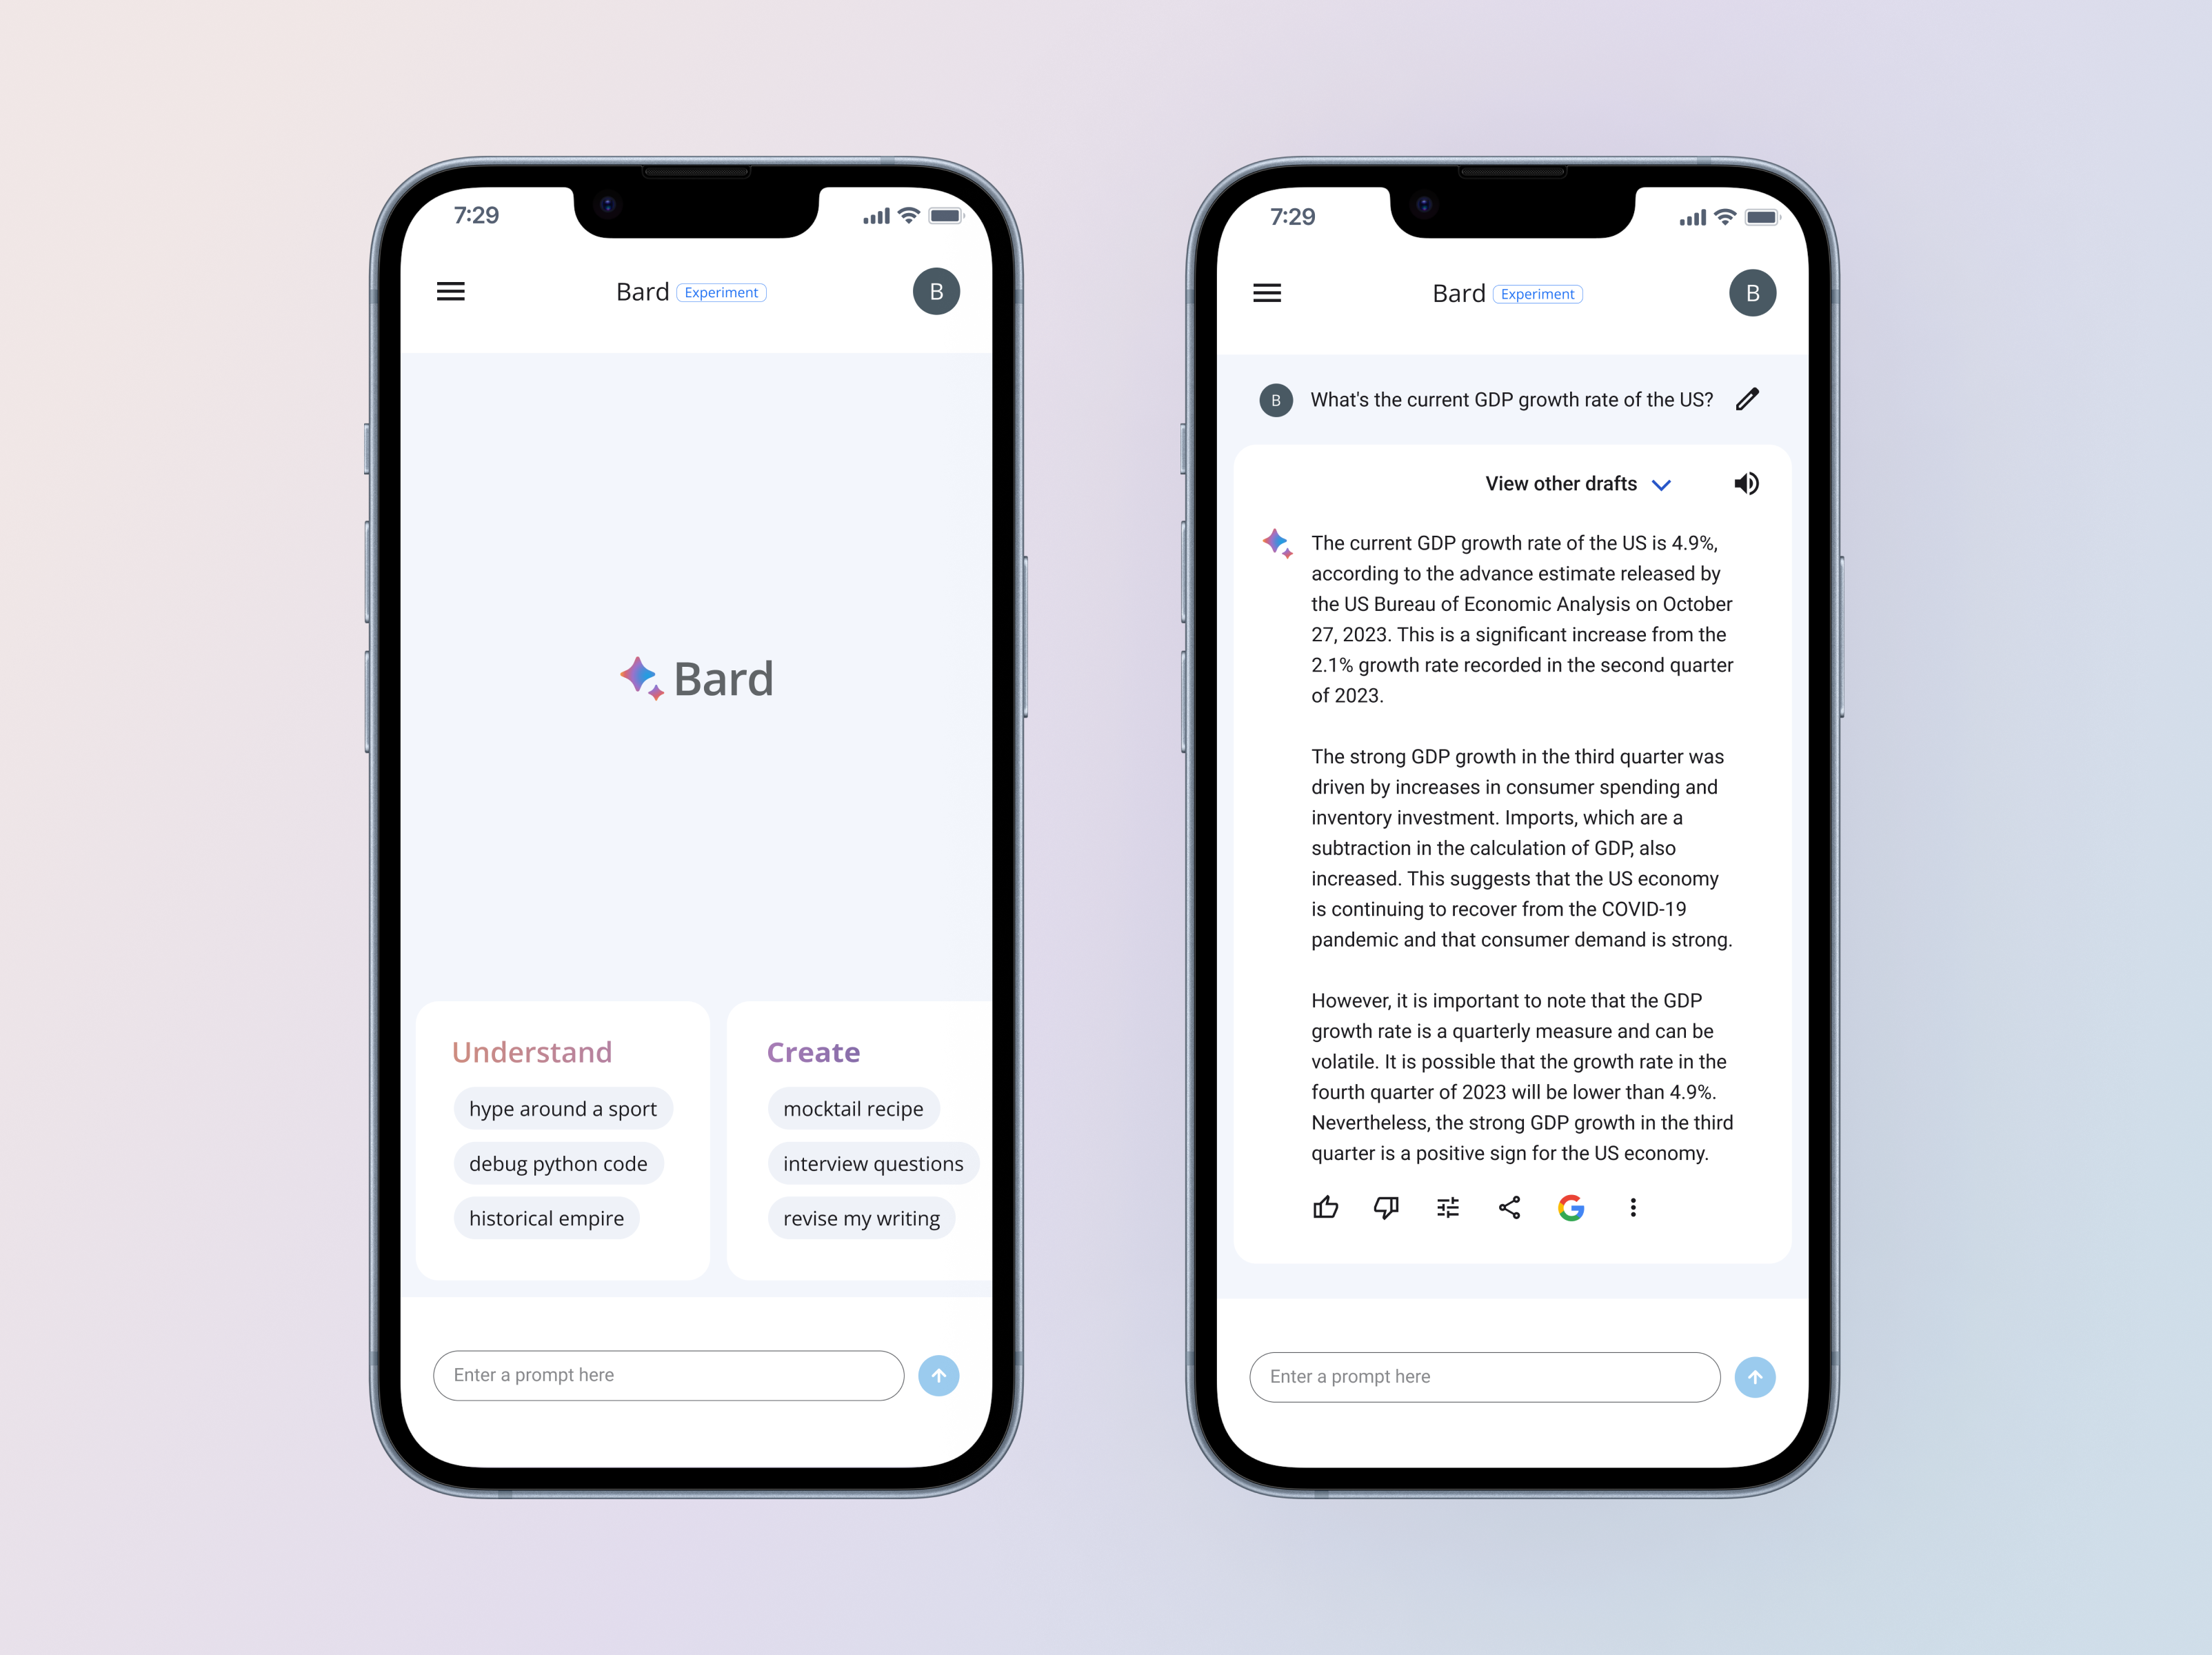 A feature of two main screens from the Bard mobile app design.